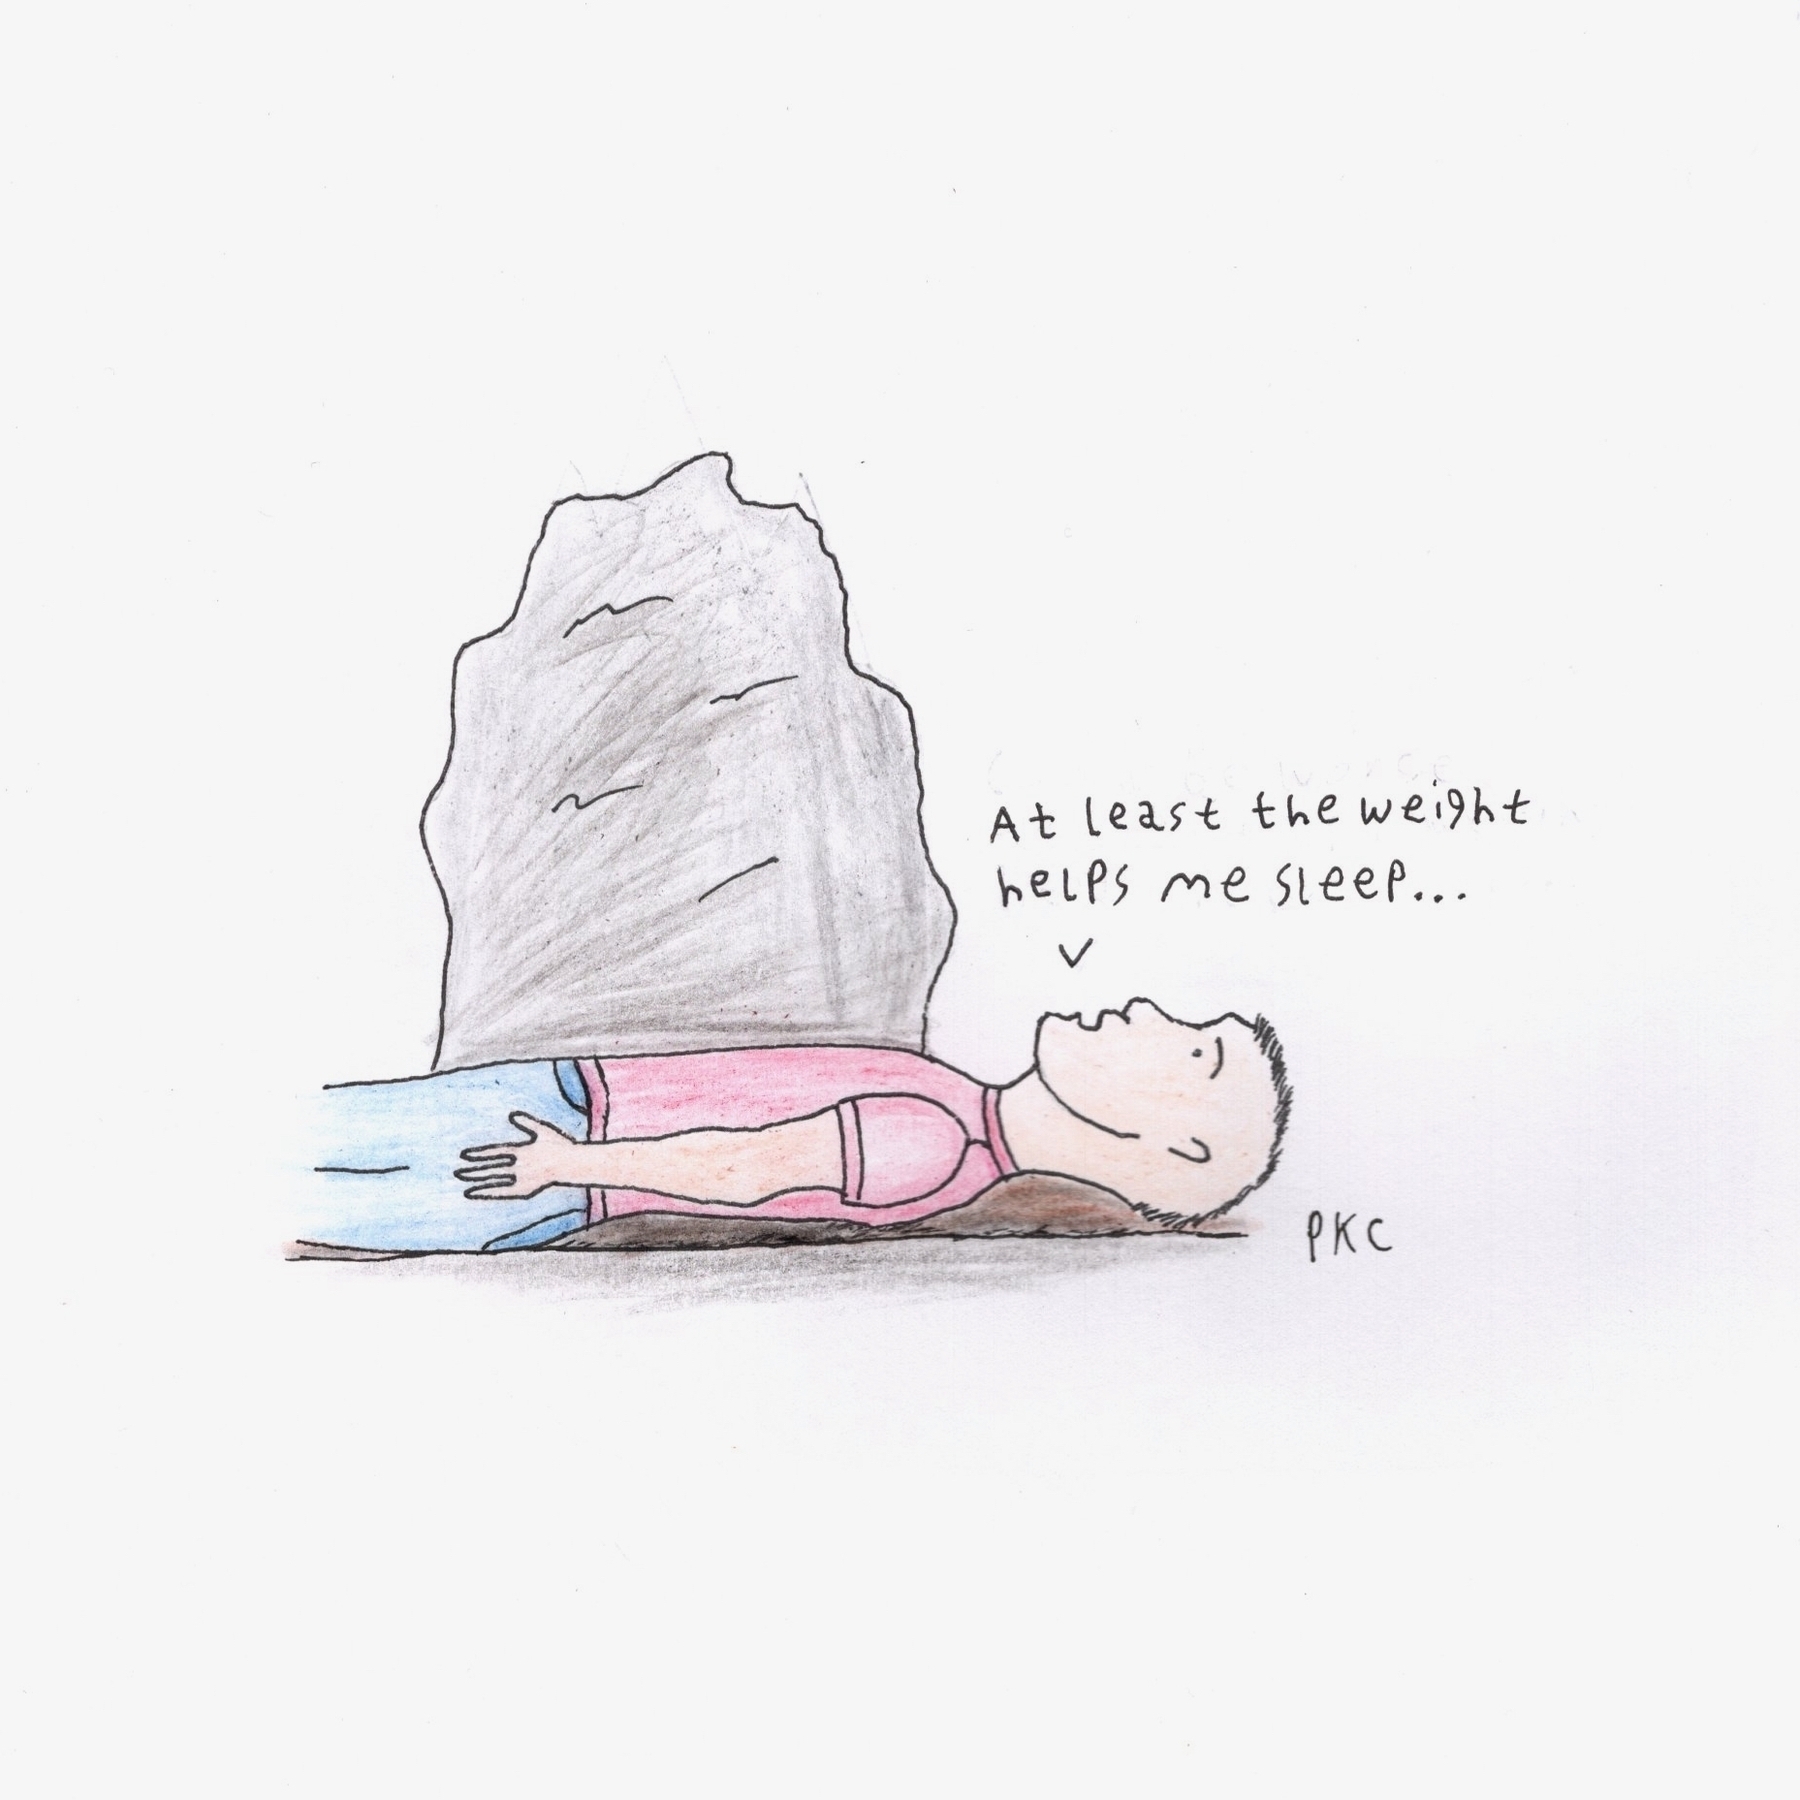 man trapped under large rock: at least the weight helps me sleep...